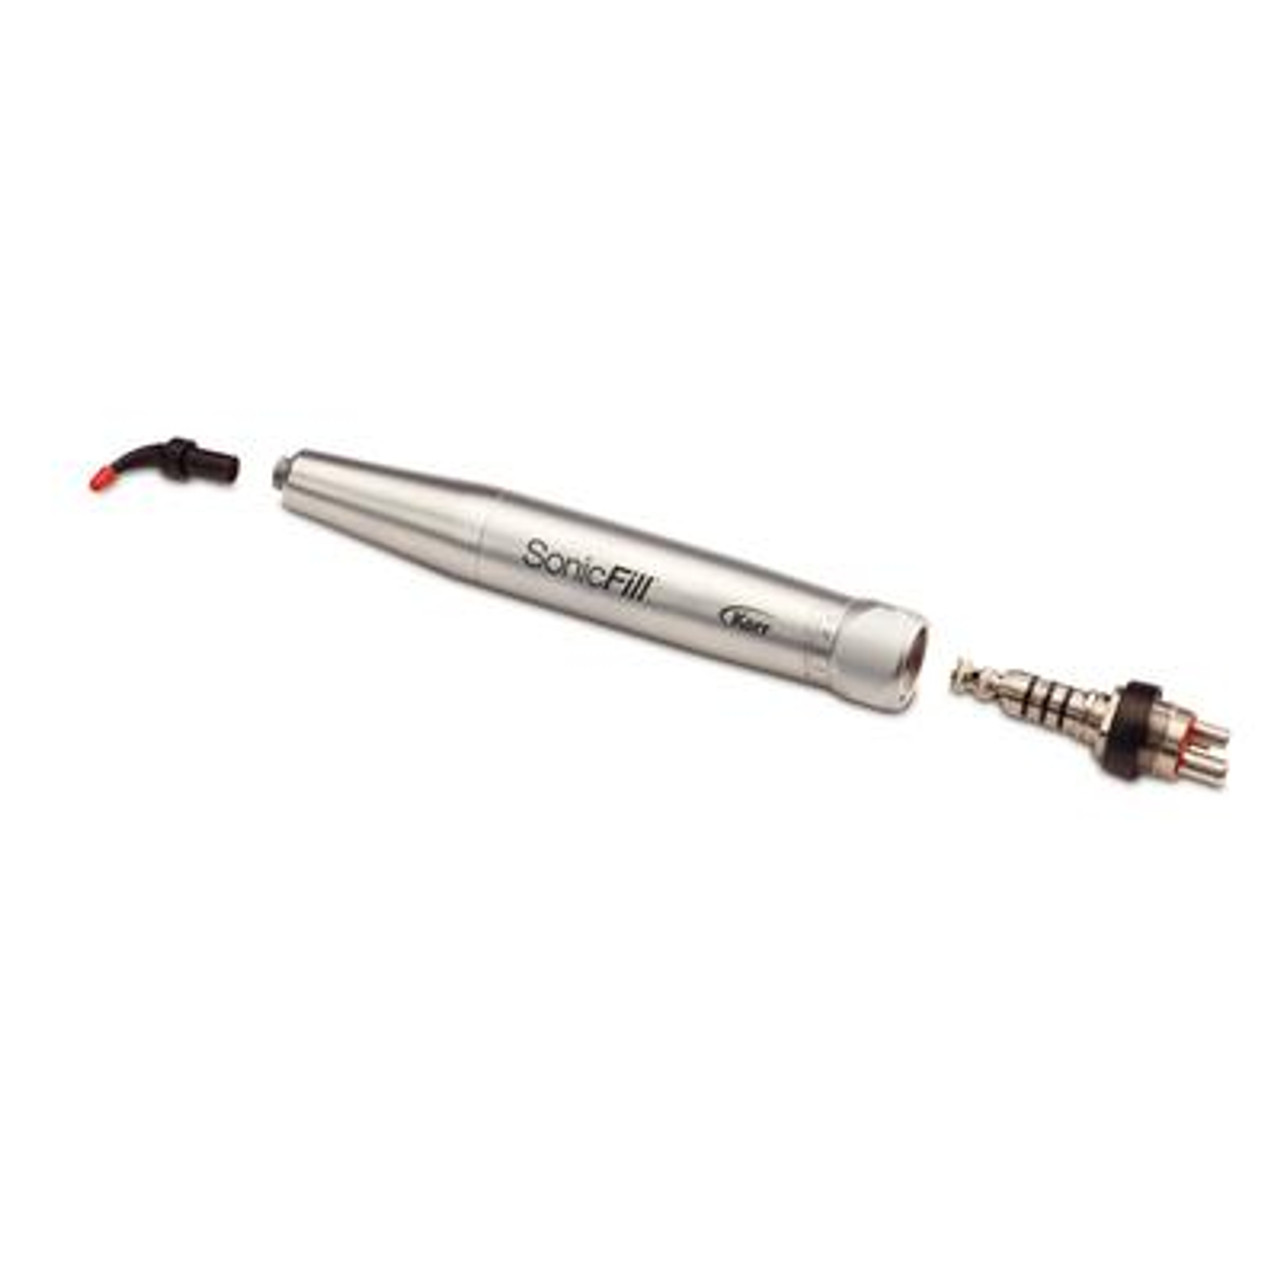 Kerr SonicFill 3 Handpiece Only